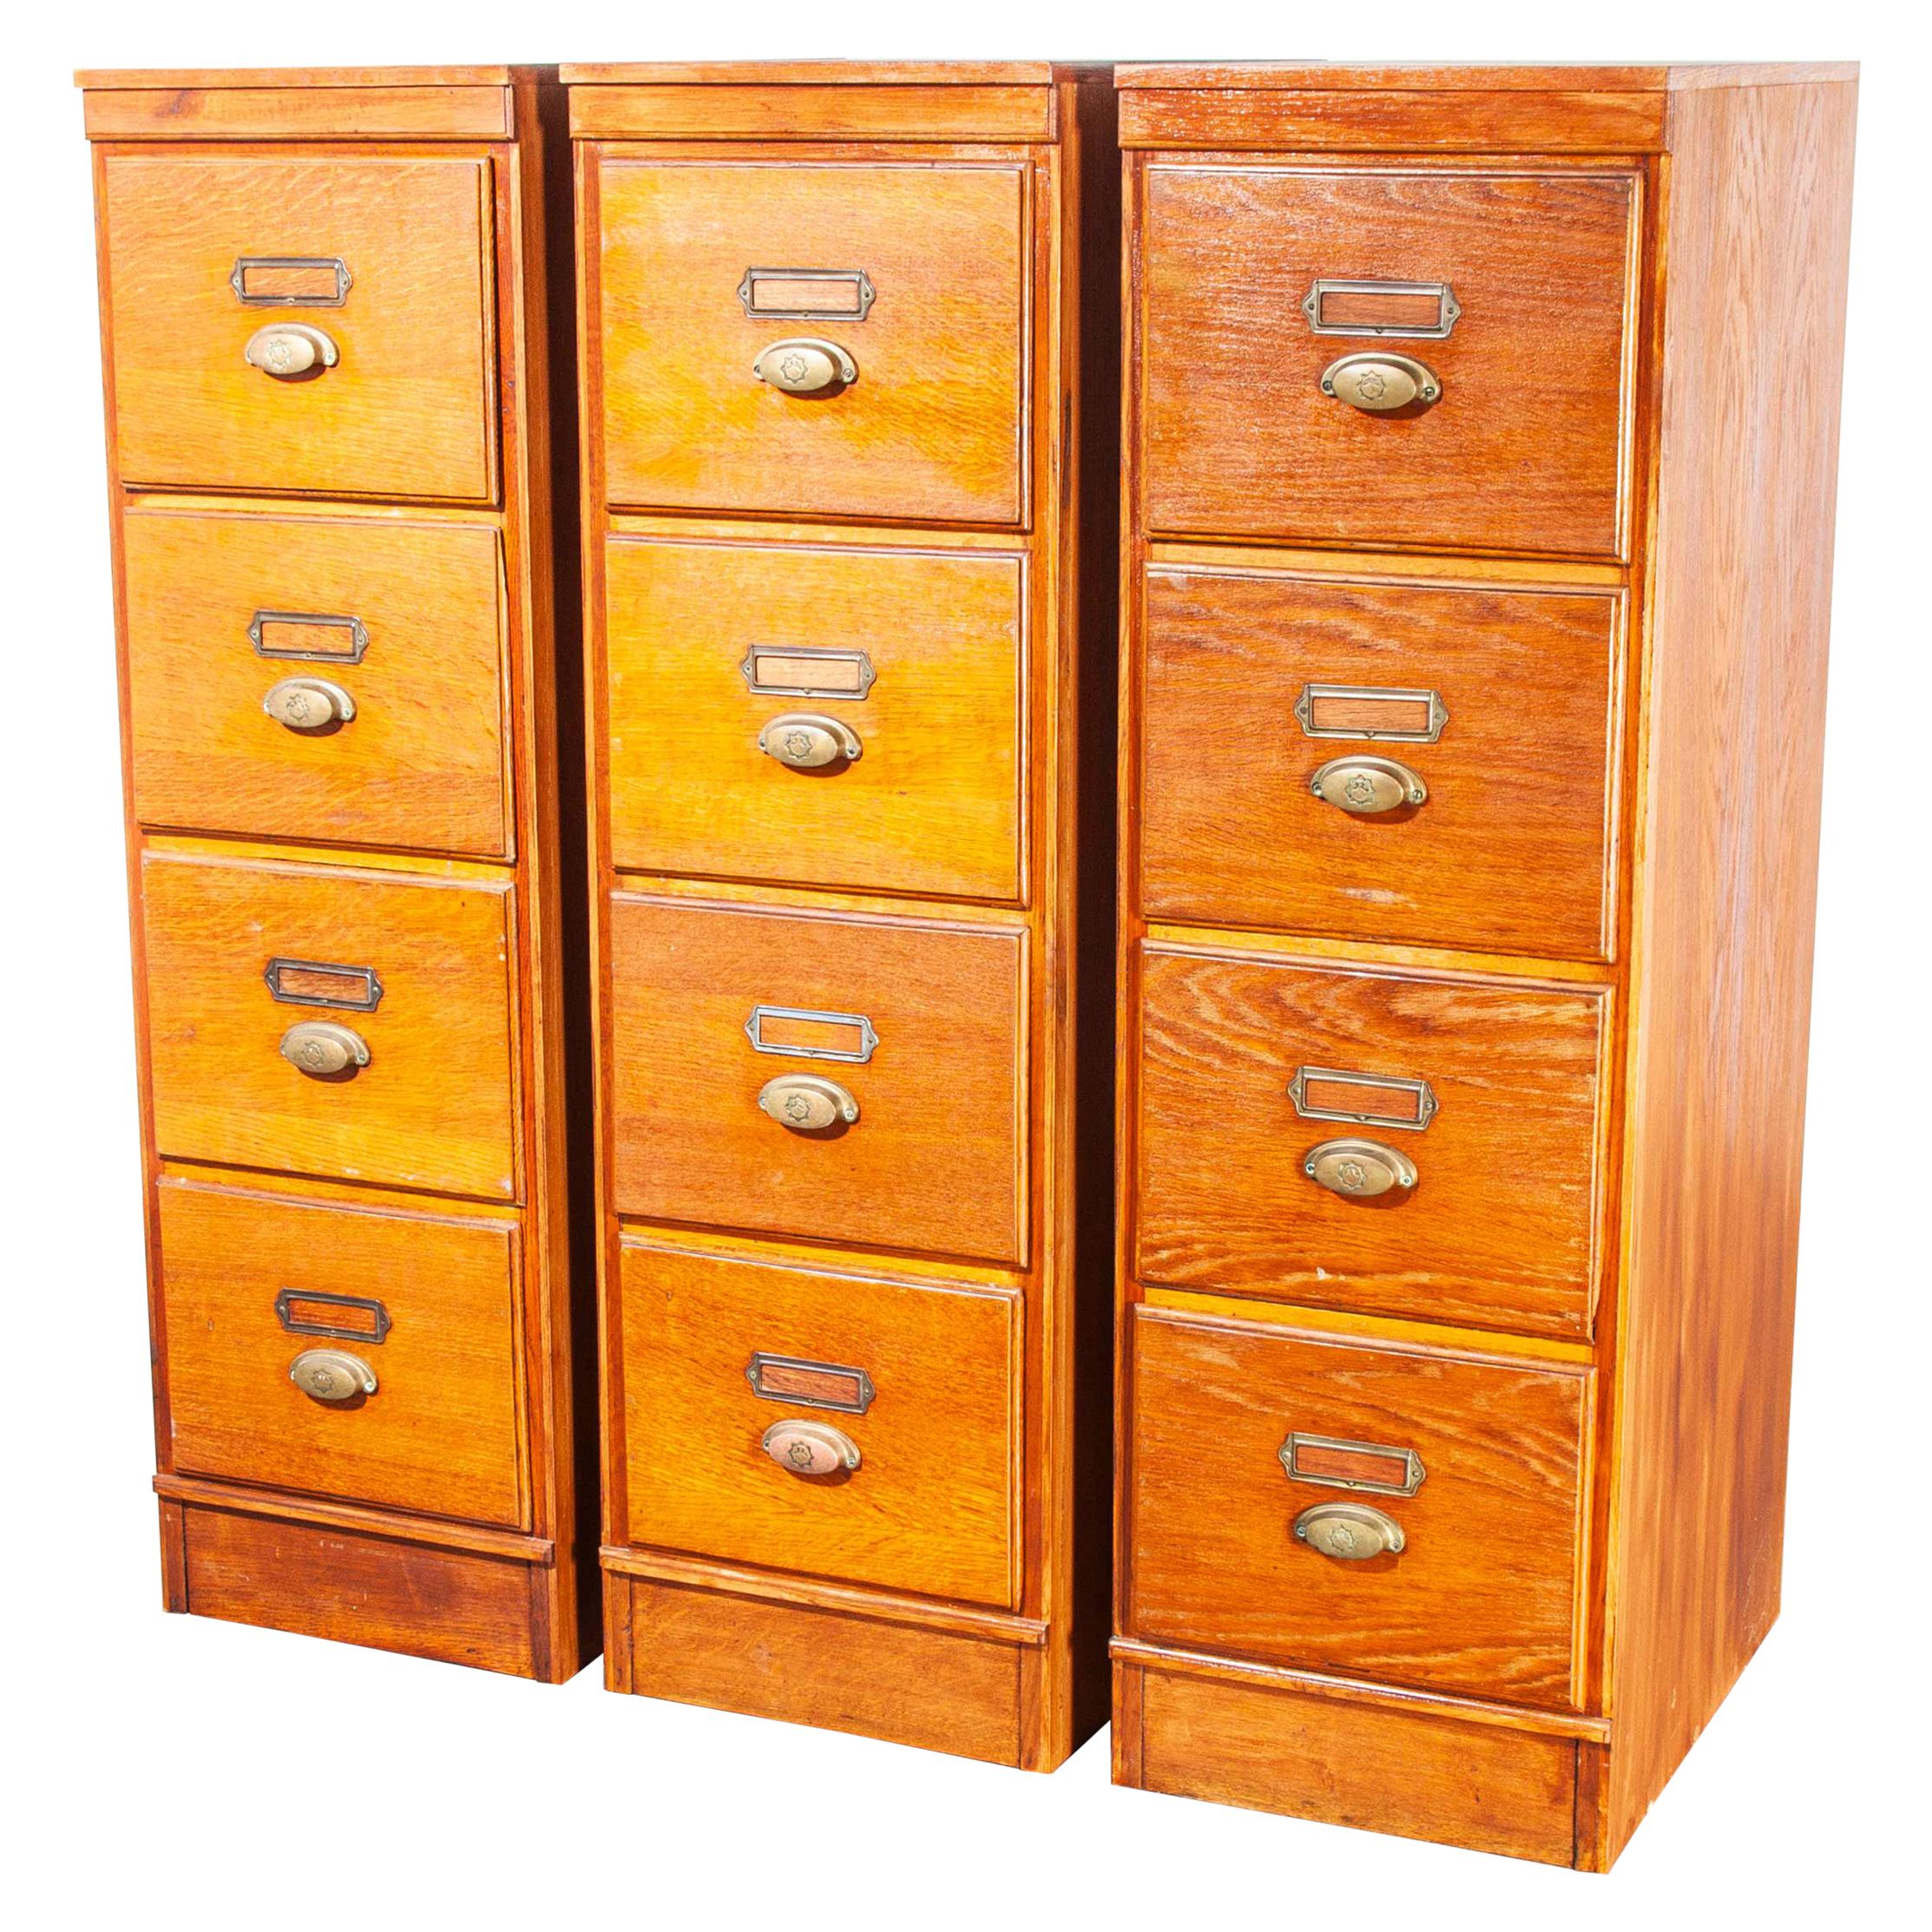 1930's Tall Oak Four Drawer Filing Cabinet - Chest Of Drawers - Three Units